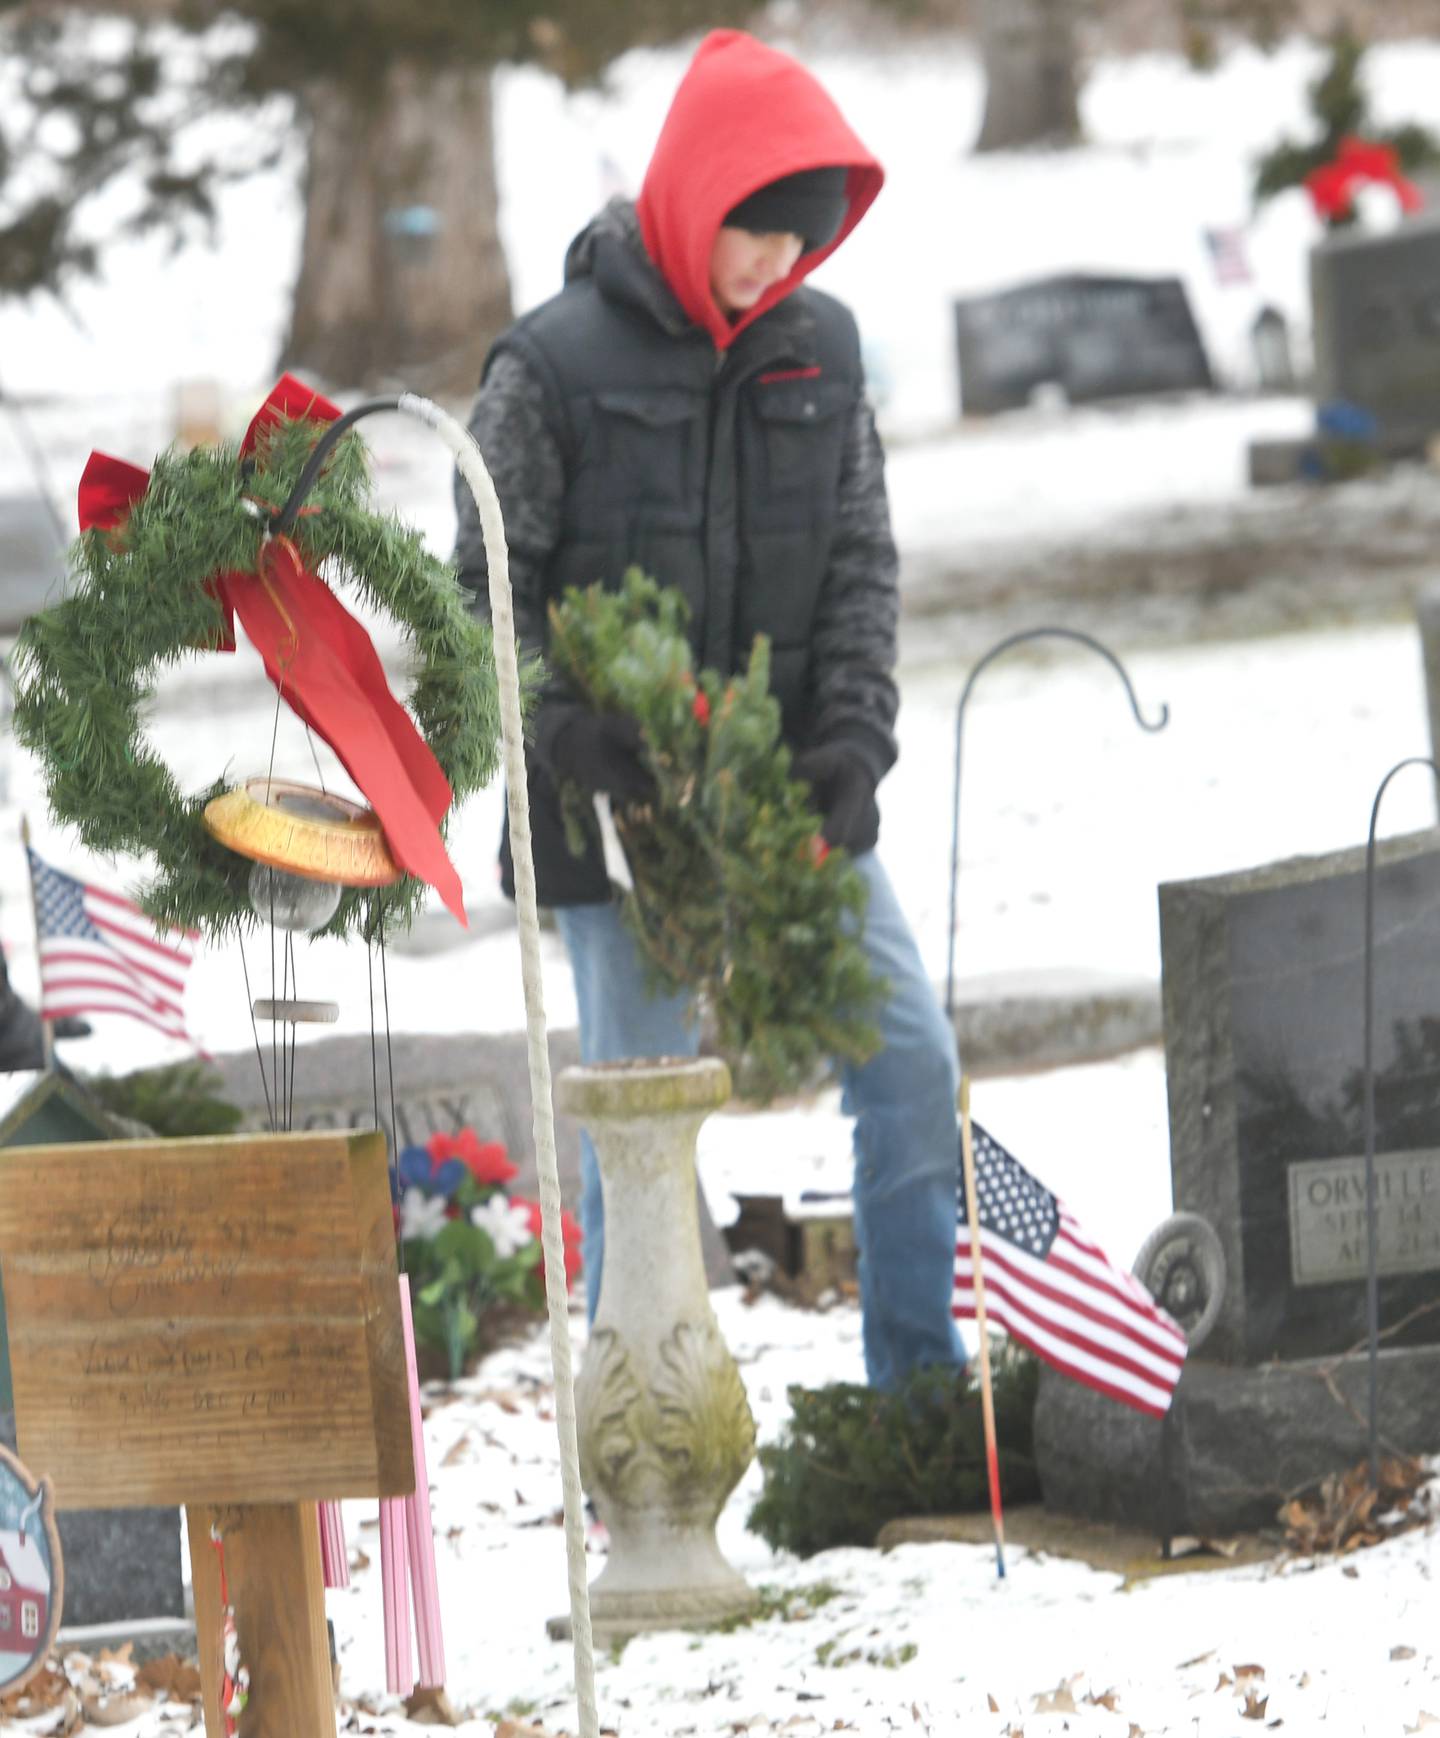 Devyn Stevents, 12, of Oregpn places a wreath on a veteran's grave in Daysville Cemetery, southeast of Oregon on Dec. 17 during the Wreaths Across America project.